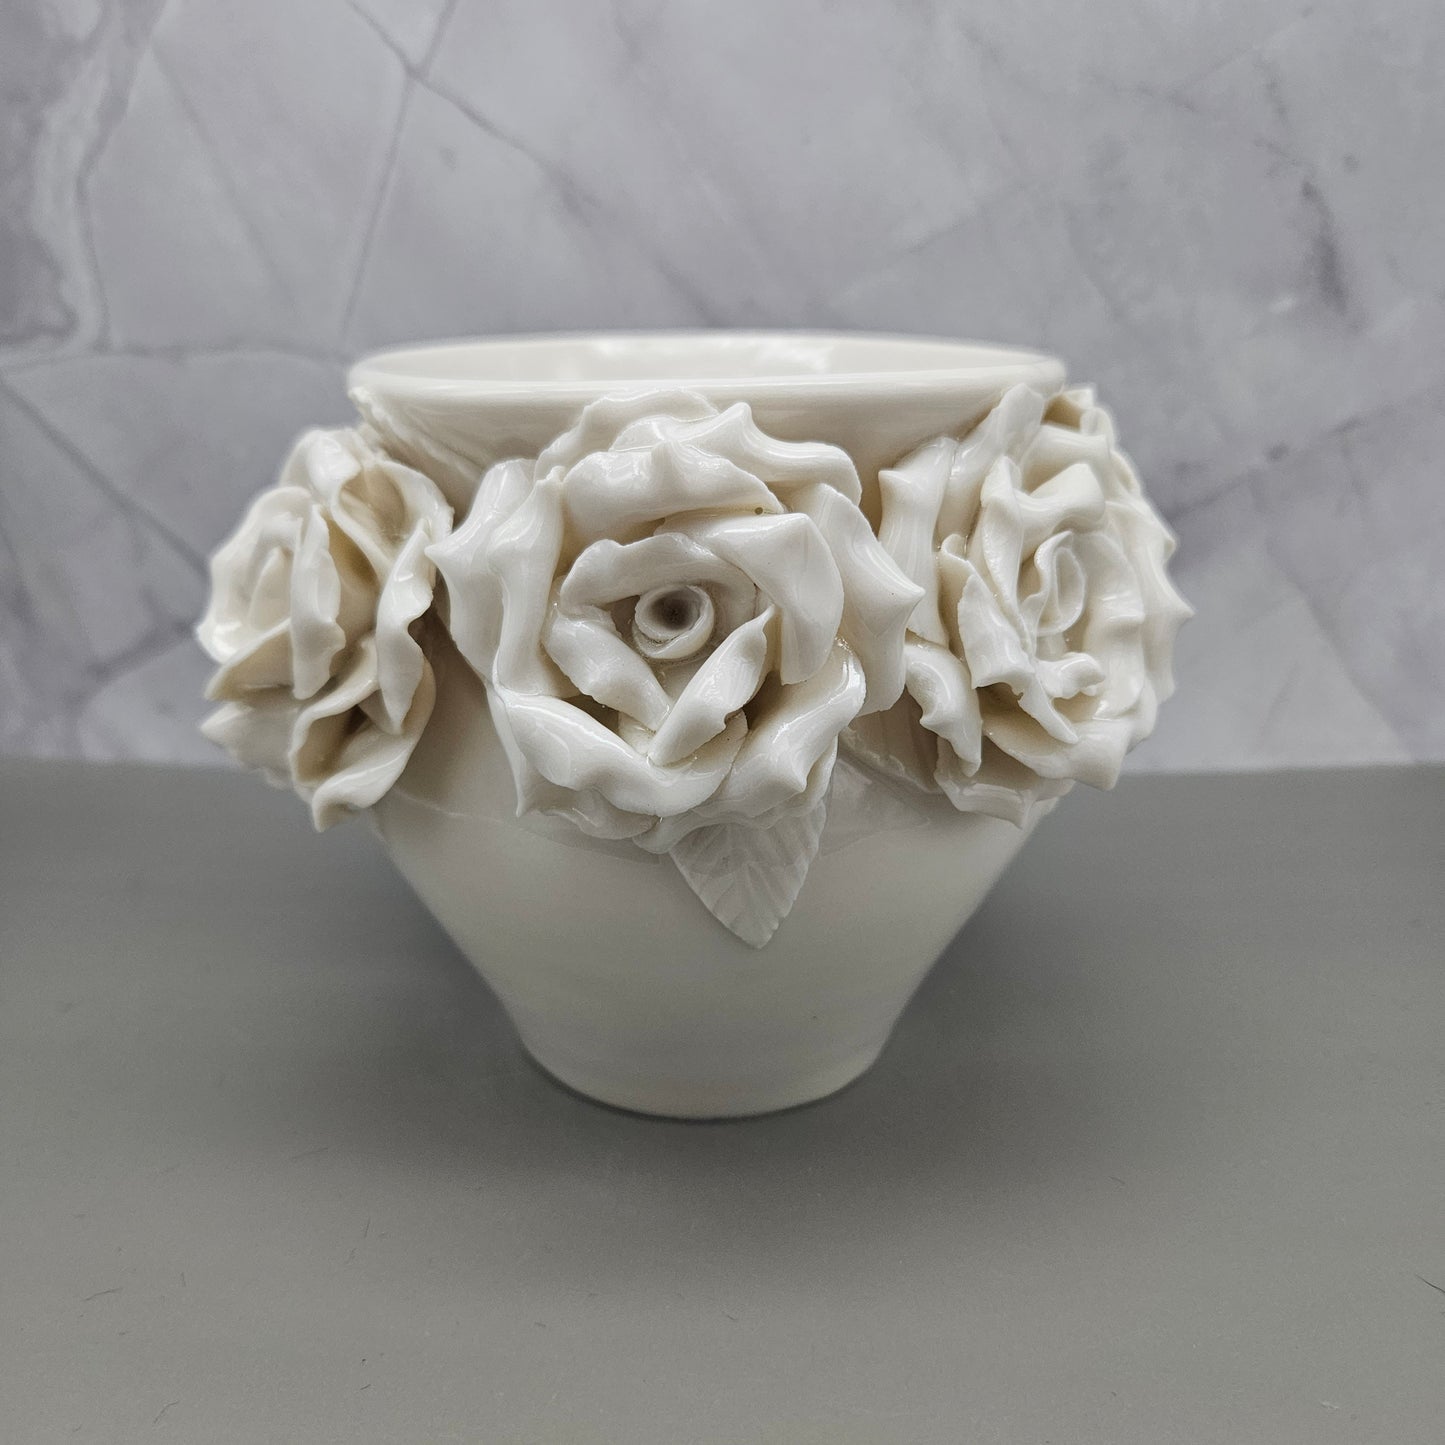 White Frost 4 inch tall rose vase